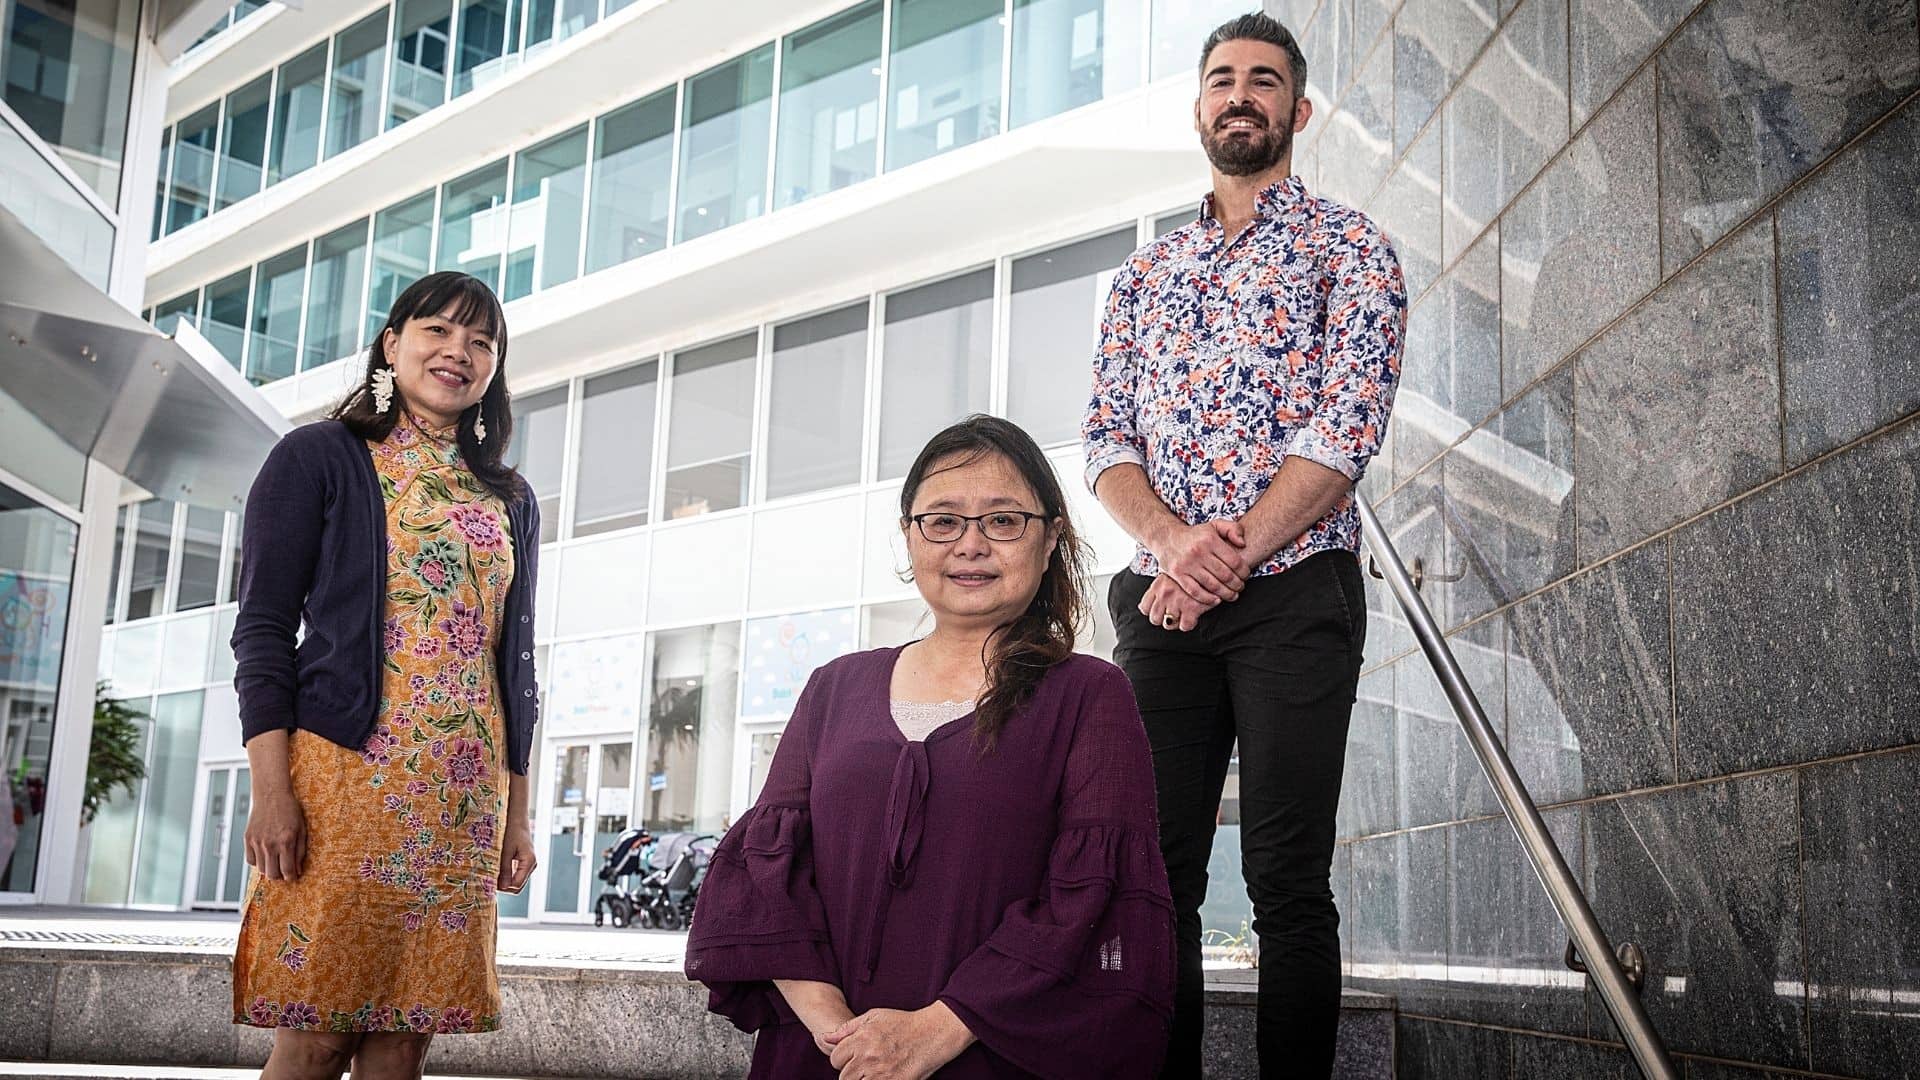 (From left) Dr Quah Ee Ling, UOW Senior Lecturer in Sociology and Chair of Ally Network, Antoinette Chow, CEO, Advance Diversity Services, and Anthony Scerri, Settlement and Community Services Manager, Advance Diversity Services. Photo: Paul Jones